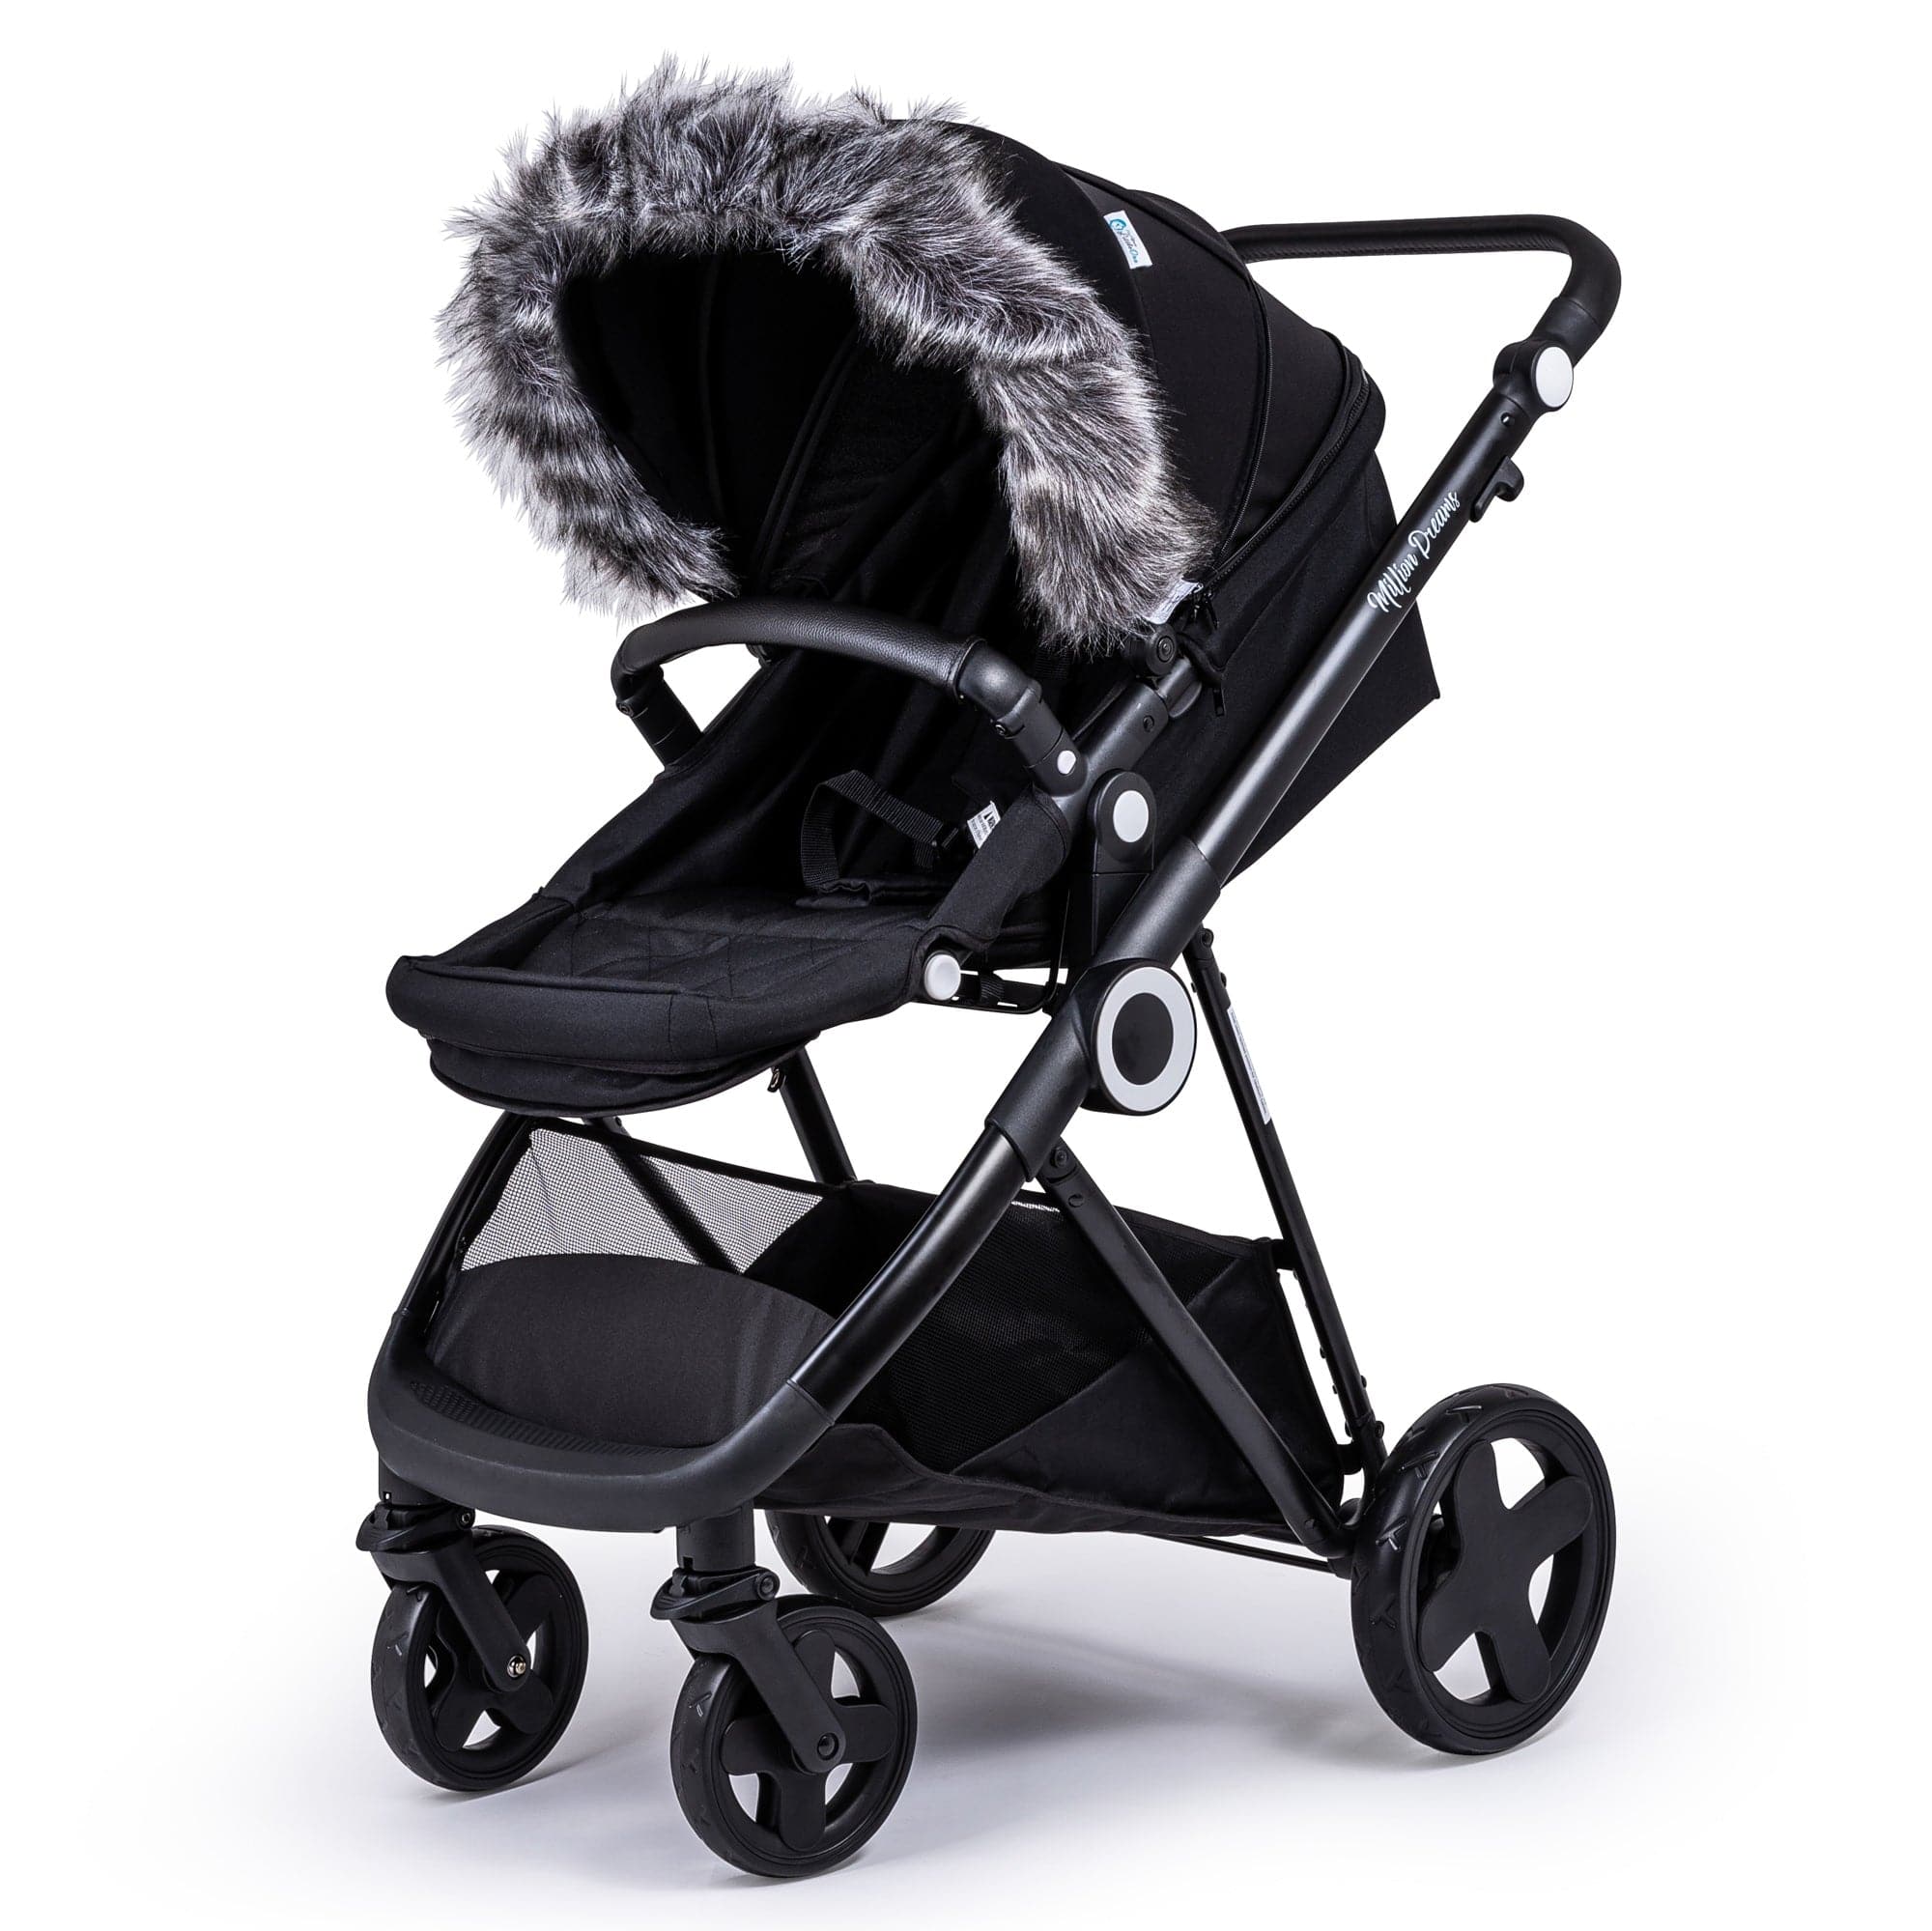 Pram Fur Hood Trim Attachment For Pushchair Compatible with Orbit Baby - Dark Grey / Fits All Models | For Your Little One